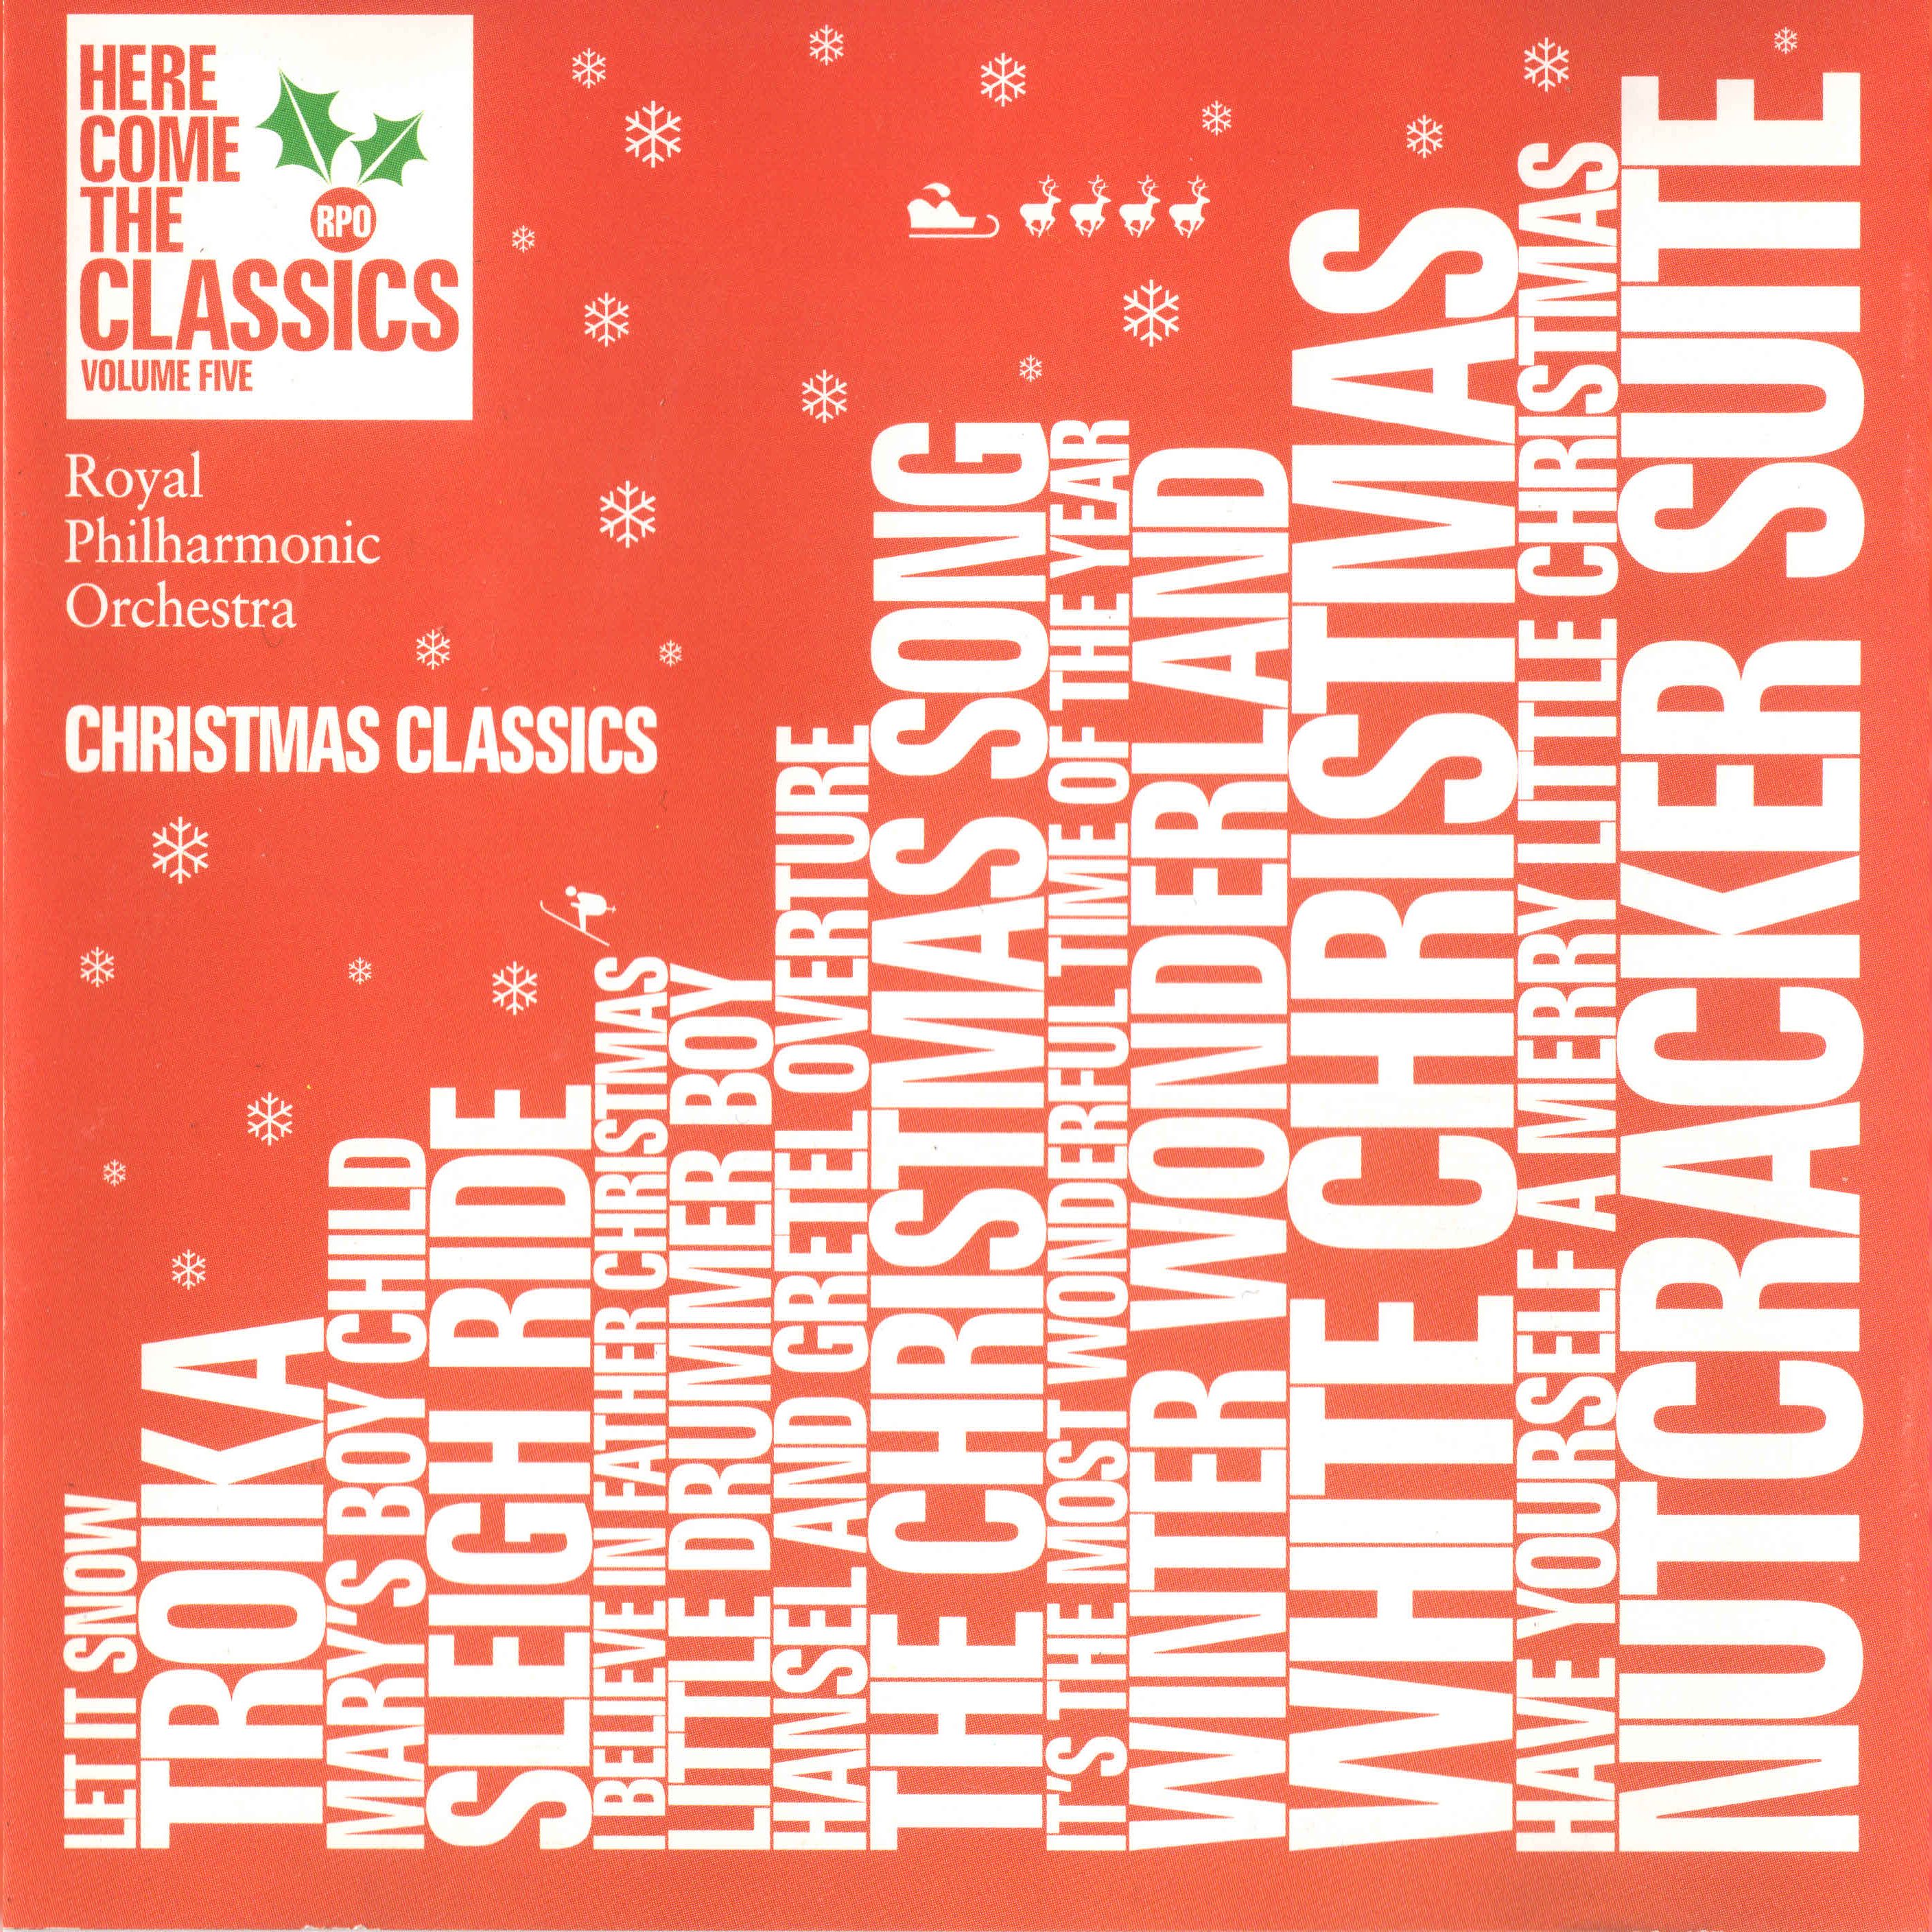 Royal Philharmonic Orchestra 'Here Come The Classics Vol 5' CD/2003/Classic/ 